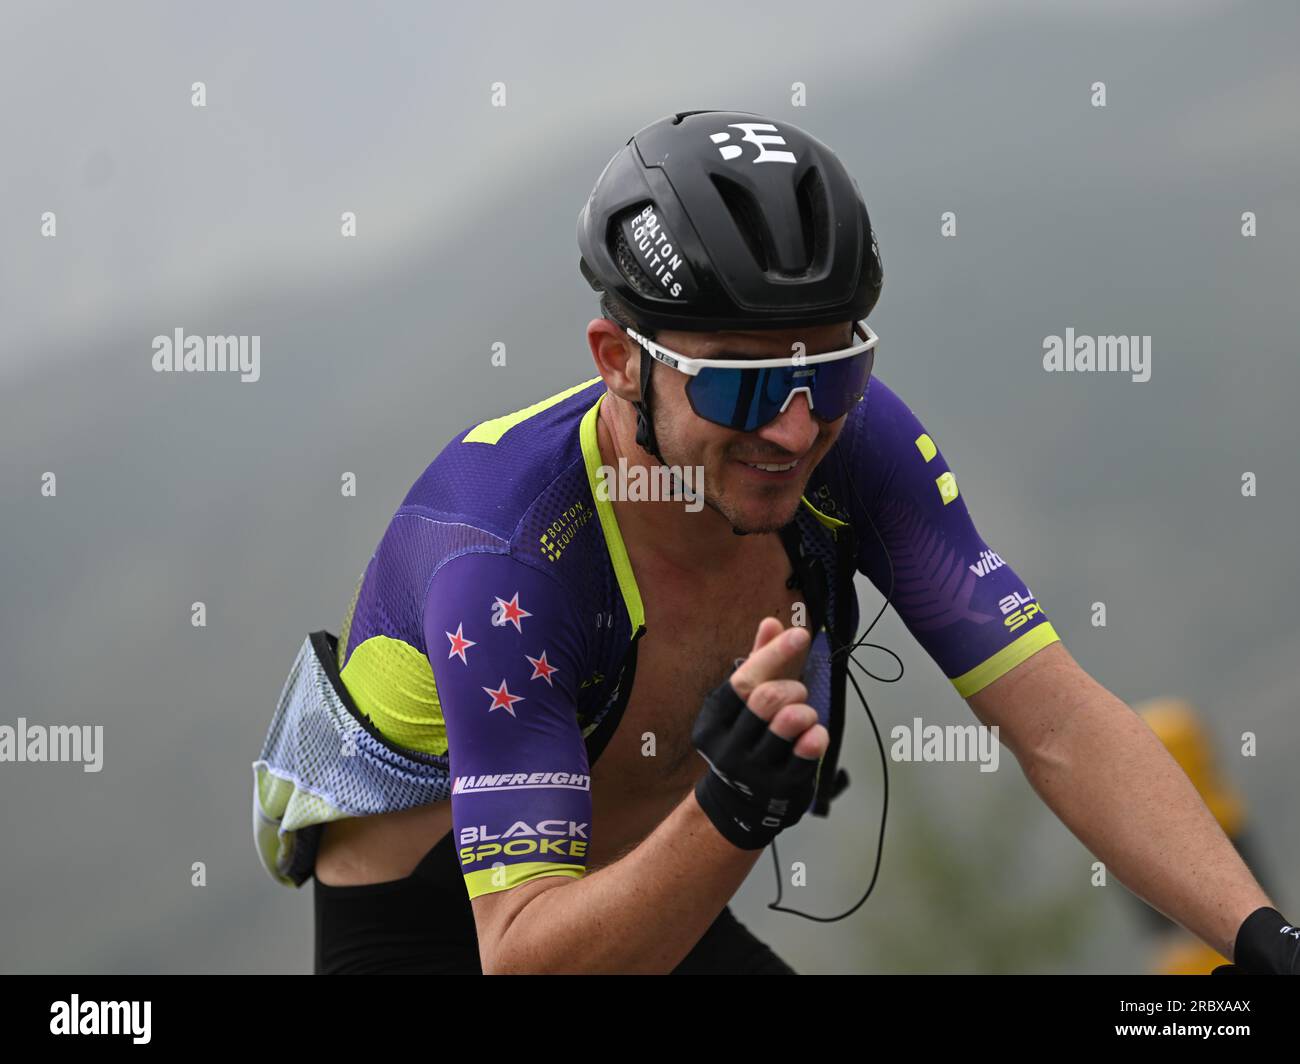 (230711) -- HUZHU, July 11, 2023 (Xinhua) -- Paul Wright of Bolton Equities Black Spoke of New Zealand competes during the stage 3 of the 22nd Tour of Qinghai Lake cycling race from Guide to Huzhu, northwest China's Qinghai Province, July 11, 2023. (Xinhua/Zhang Long) Stock Photo